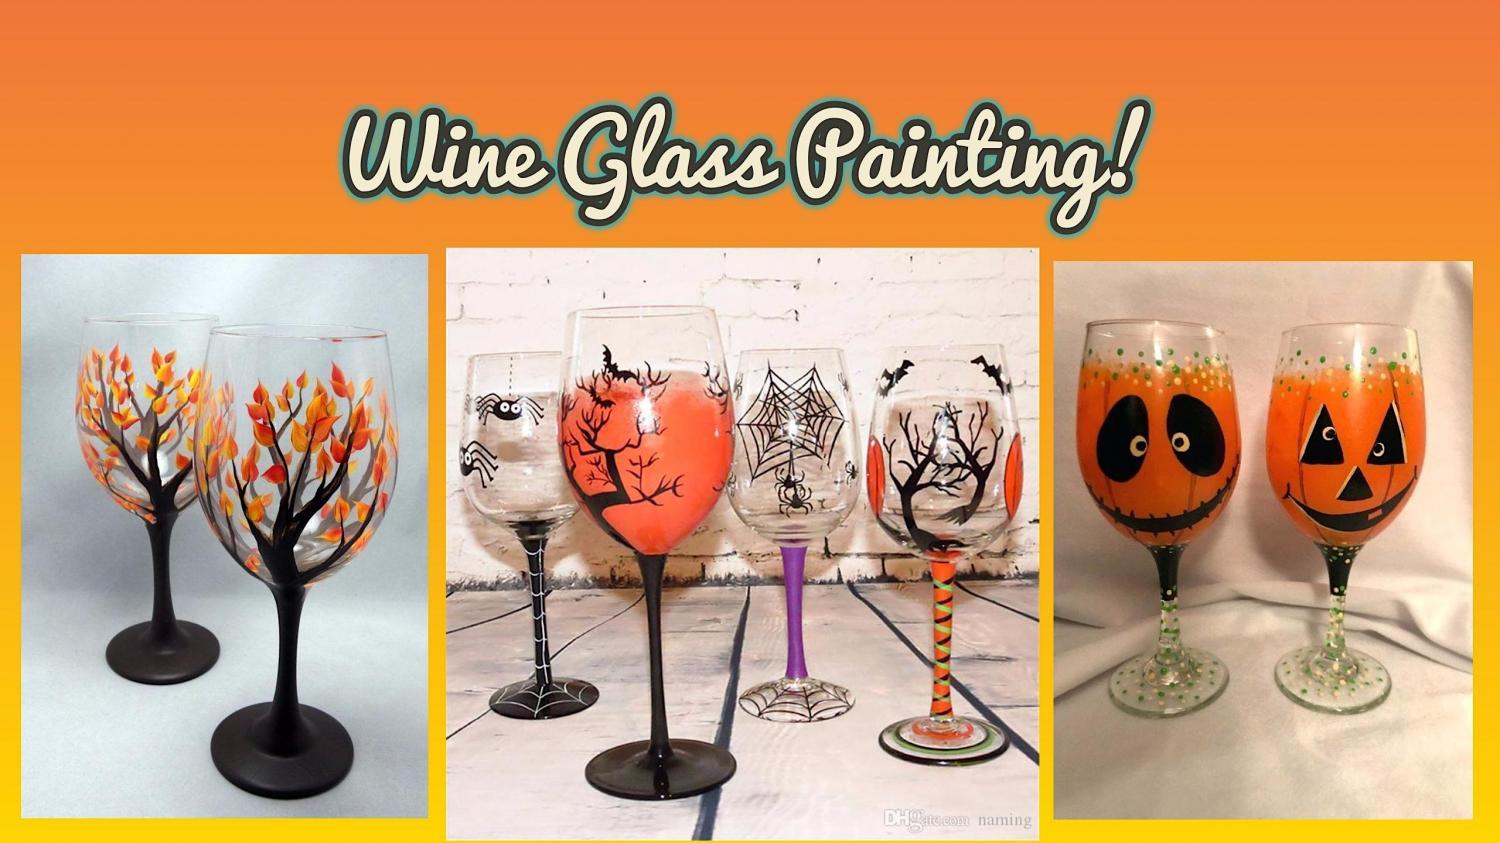 Halloween Wine Glass Painting with Amanda Moon
Sat Oct 22, 7:00 PM - Sat Oct 22, 7:00 PM
in 2 days